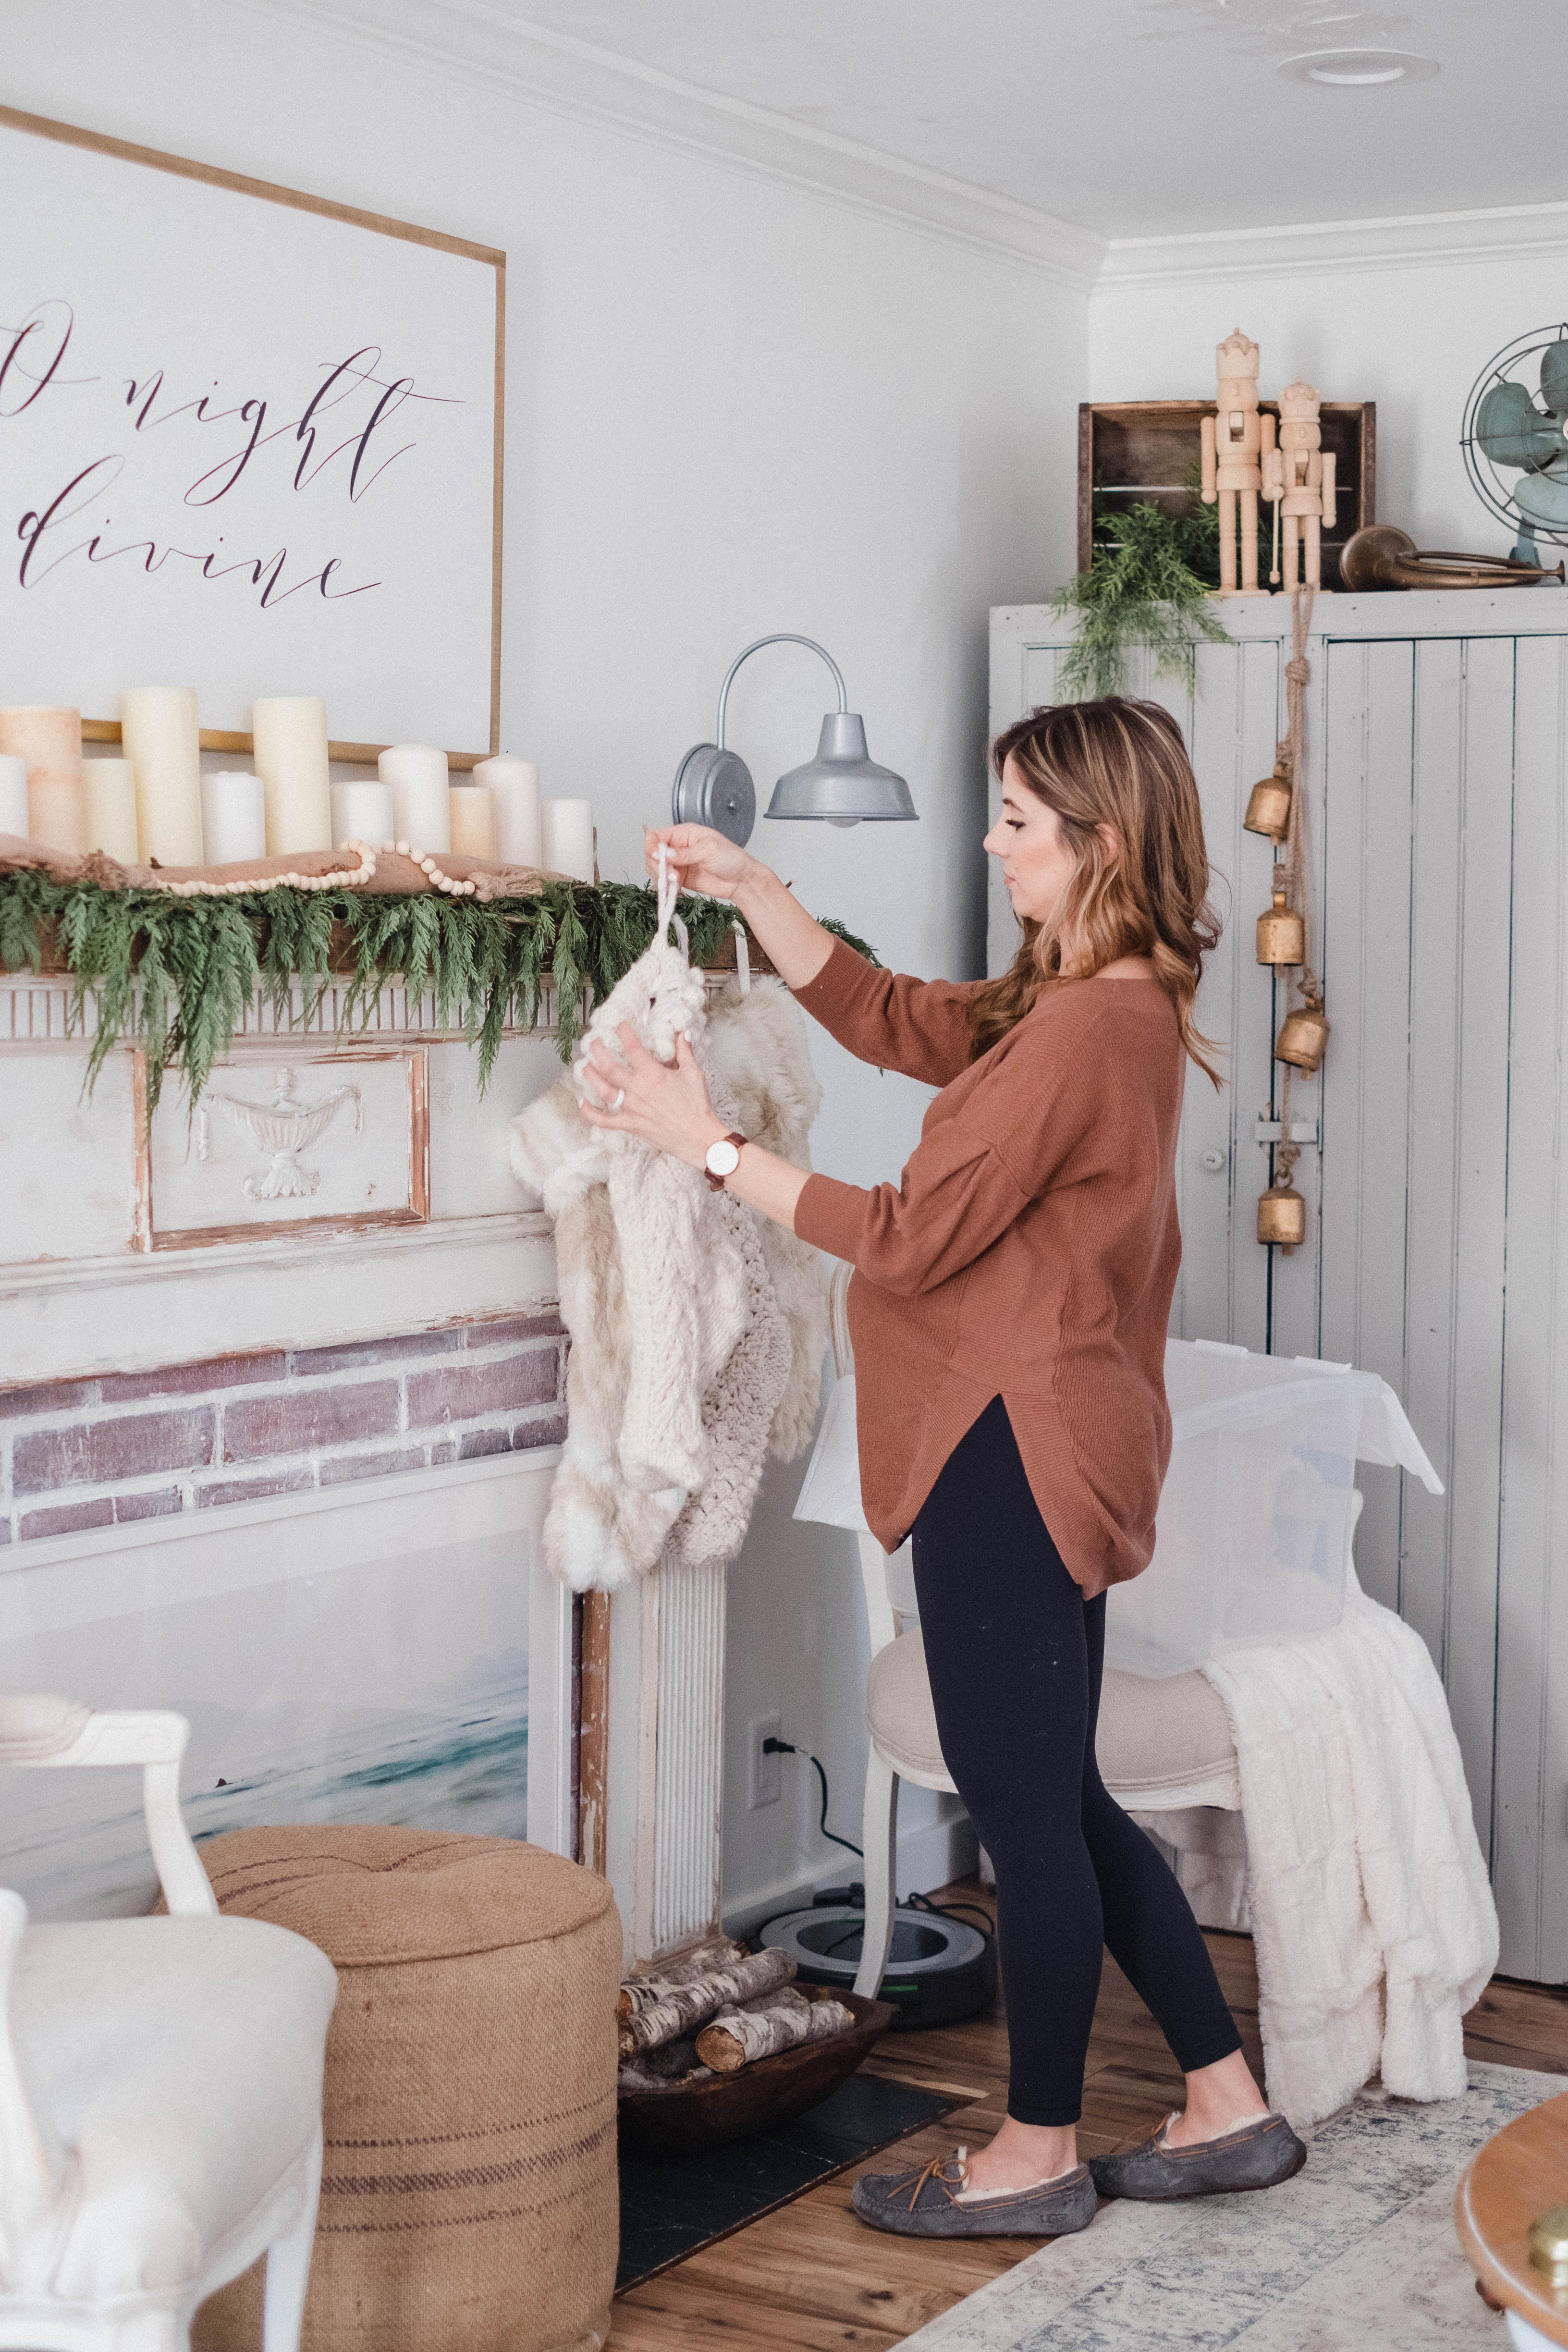 Life and style blogger Lauren McBride shares Simple Holiday Storage Tips that will keep your holiday decor organized for the next holiday season!